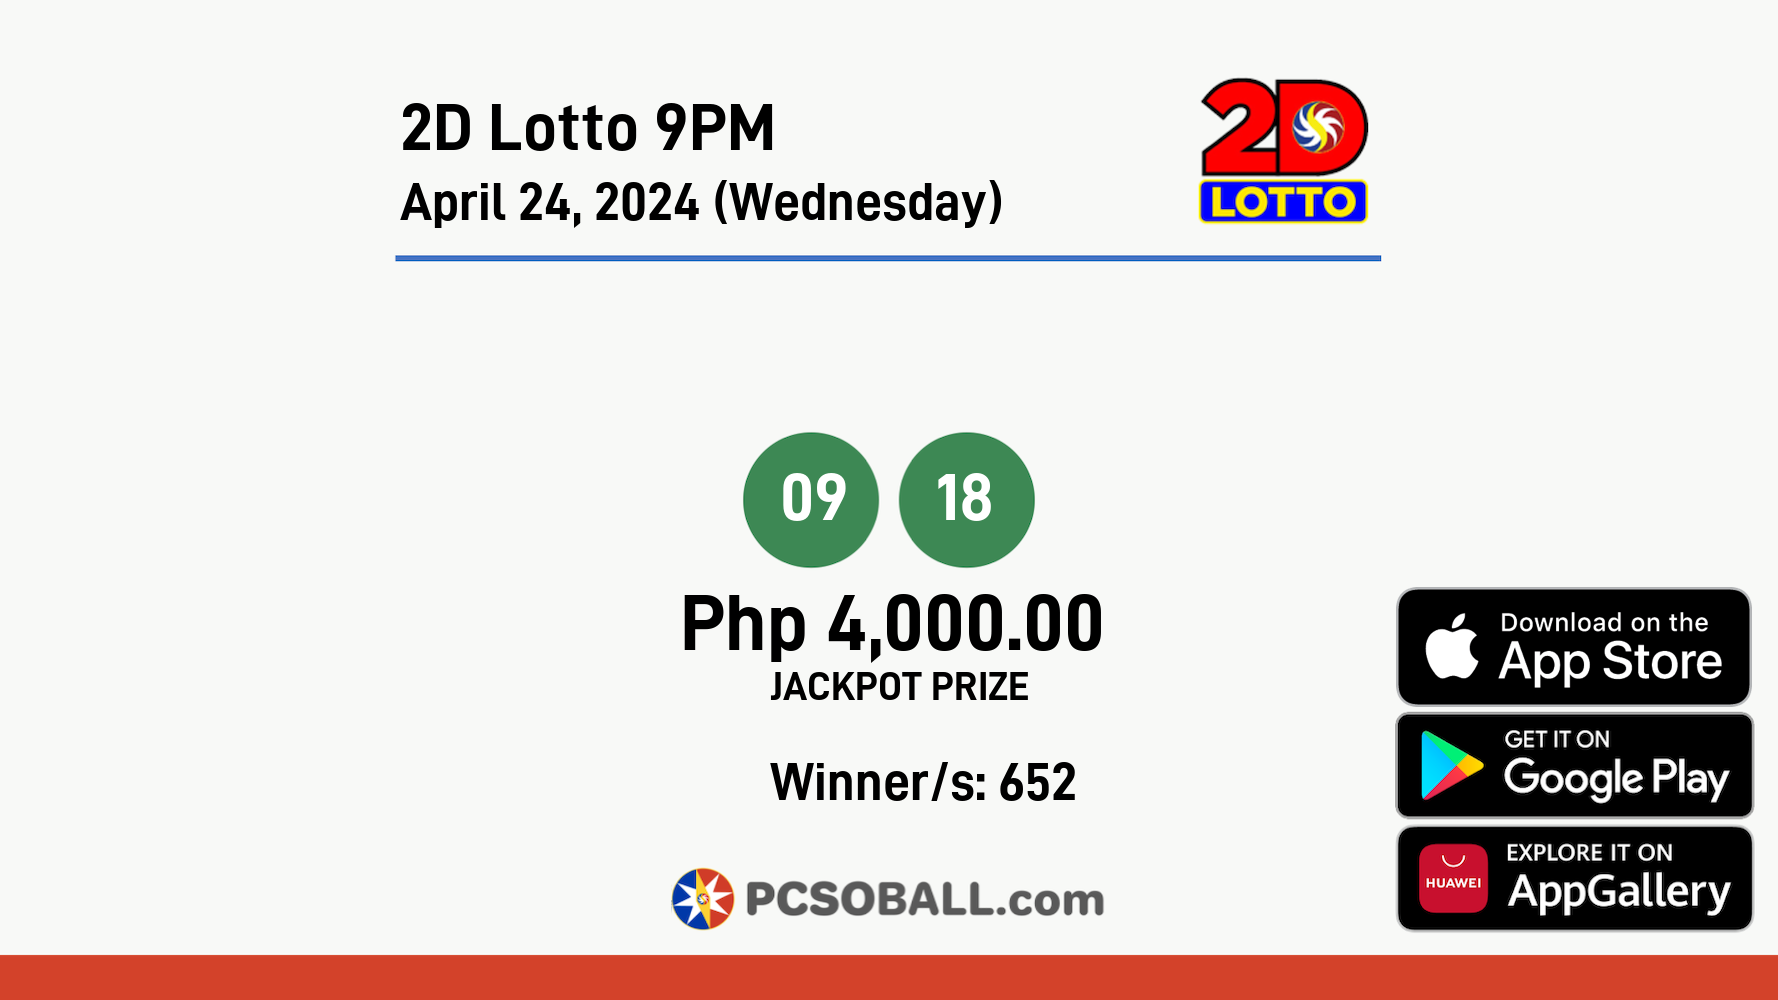 2D Lotto 9PM April 24, 2024 (Wednesday) Result